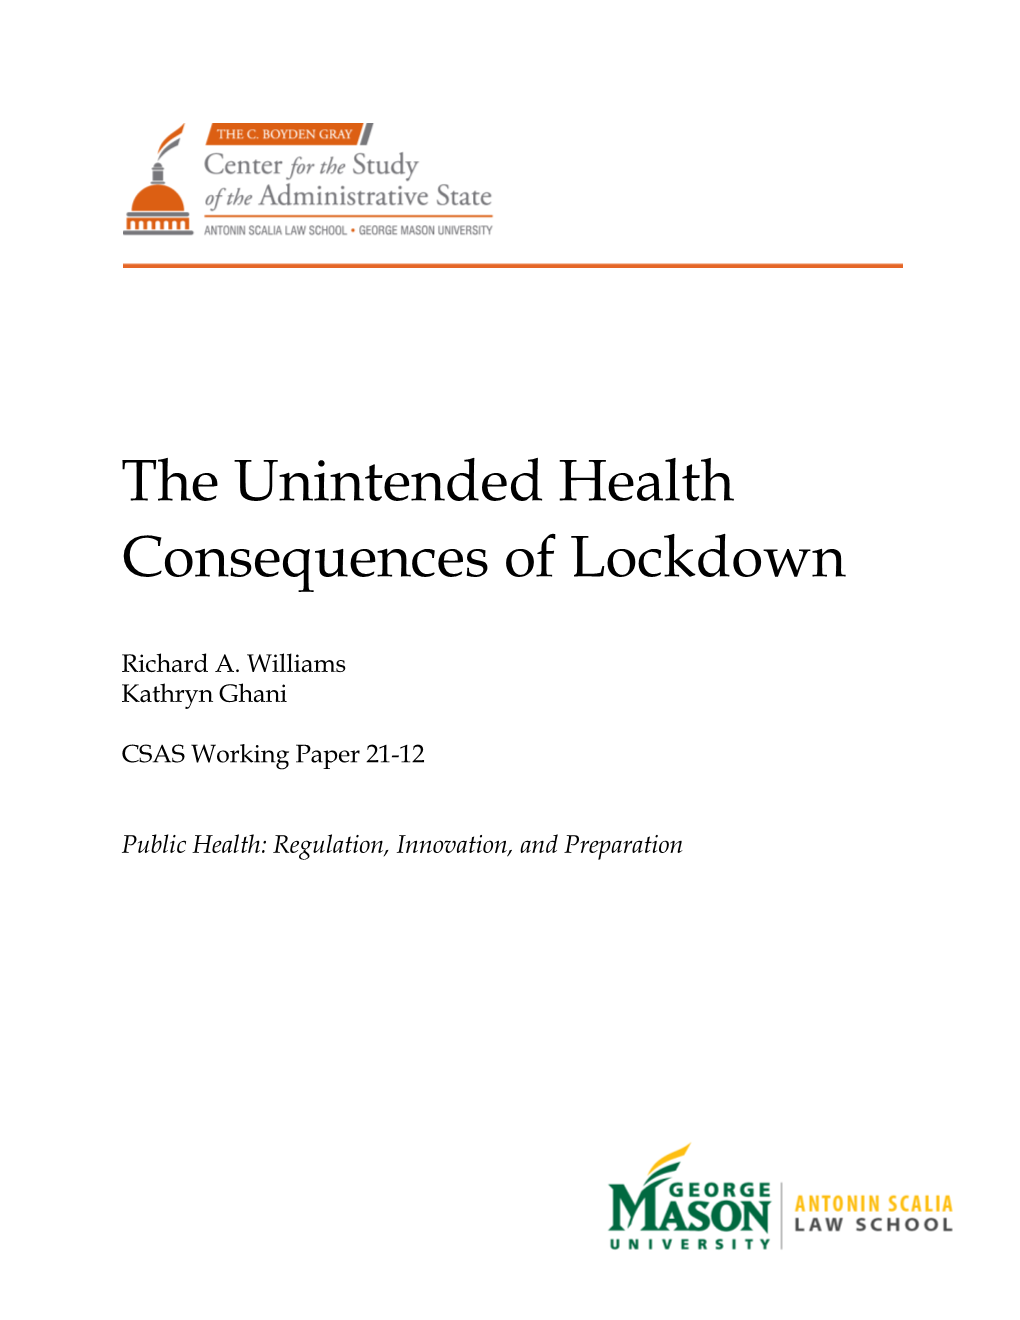 The Unintended Health Consequences of Lockdown